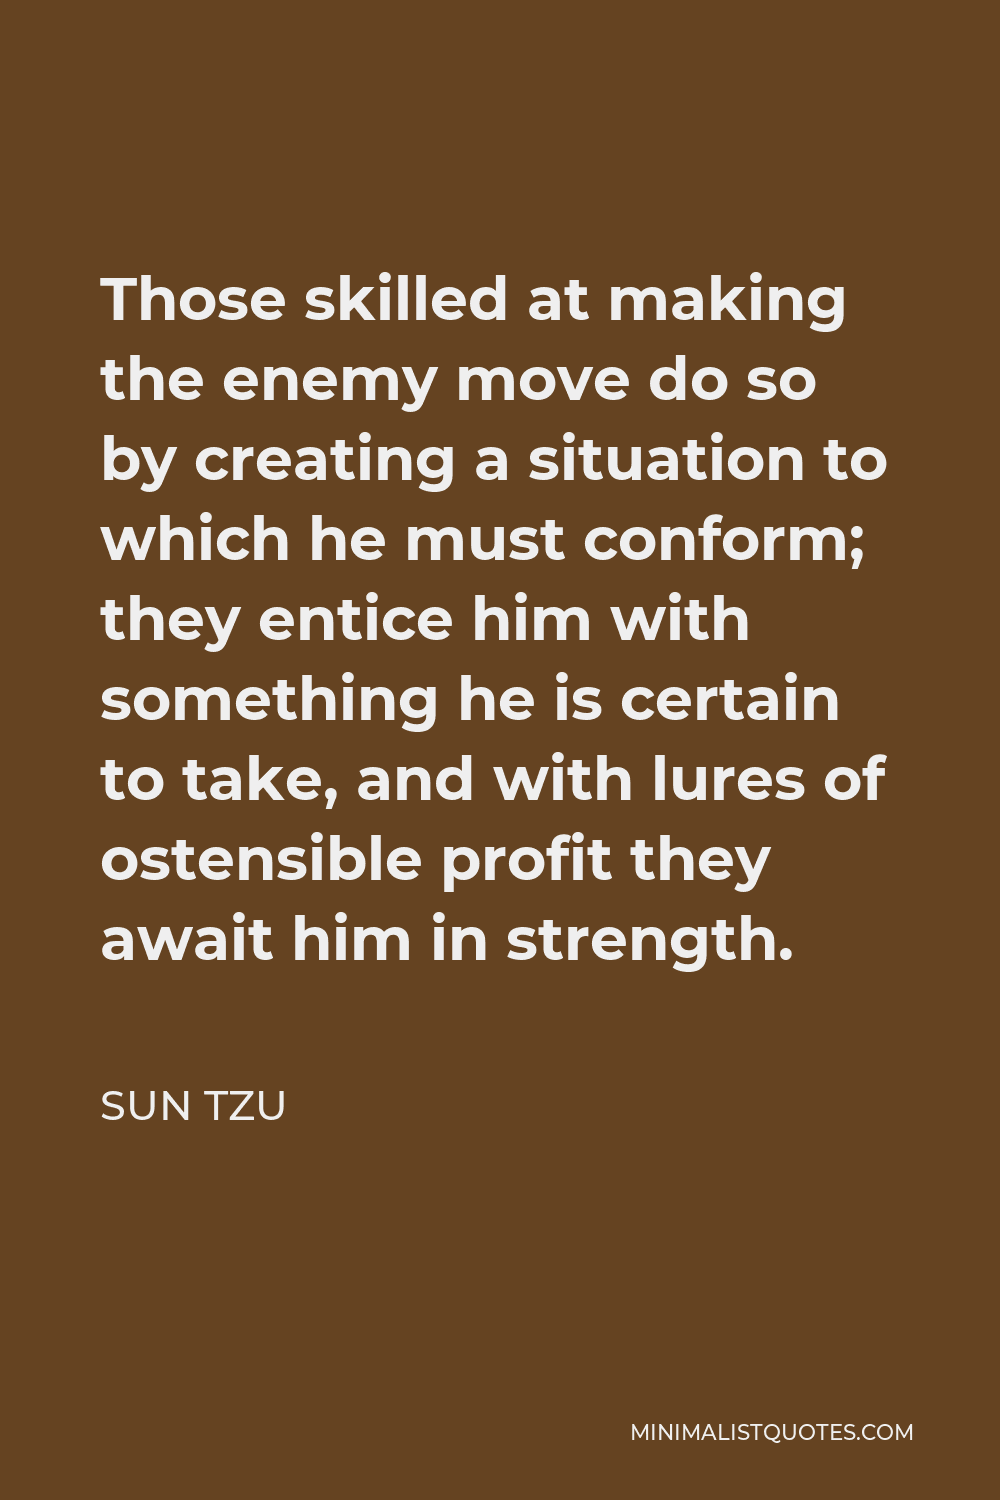 Sun Tzu Quote - Those skilled at making the enemy move do so by creating a situation to which he must conform; they entice him with something he is certain to take, and with lures of ostensible profit they await him in strength.